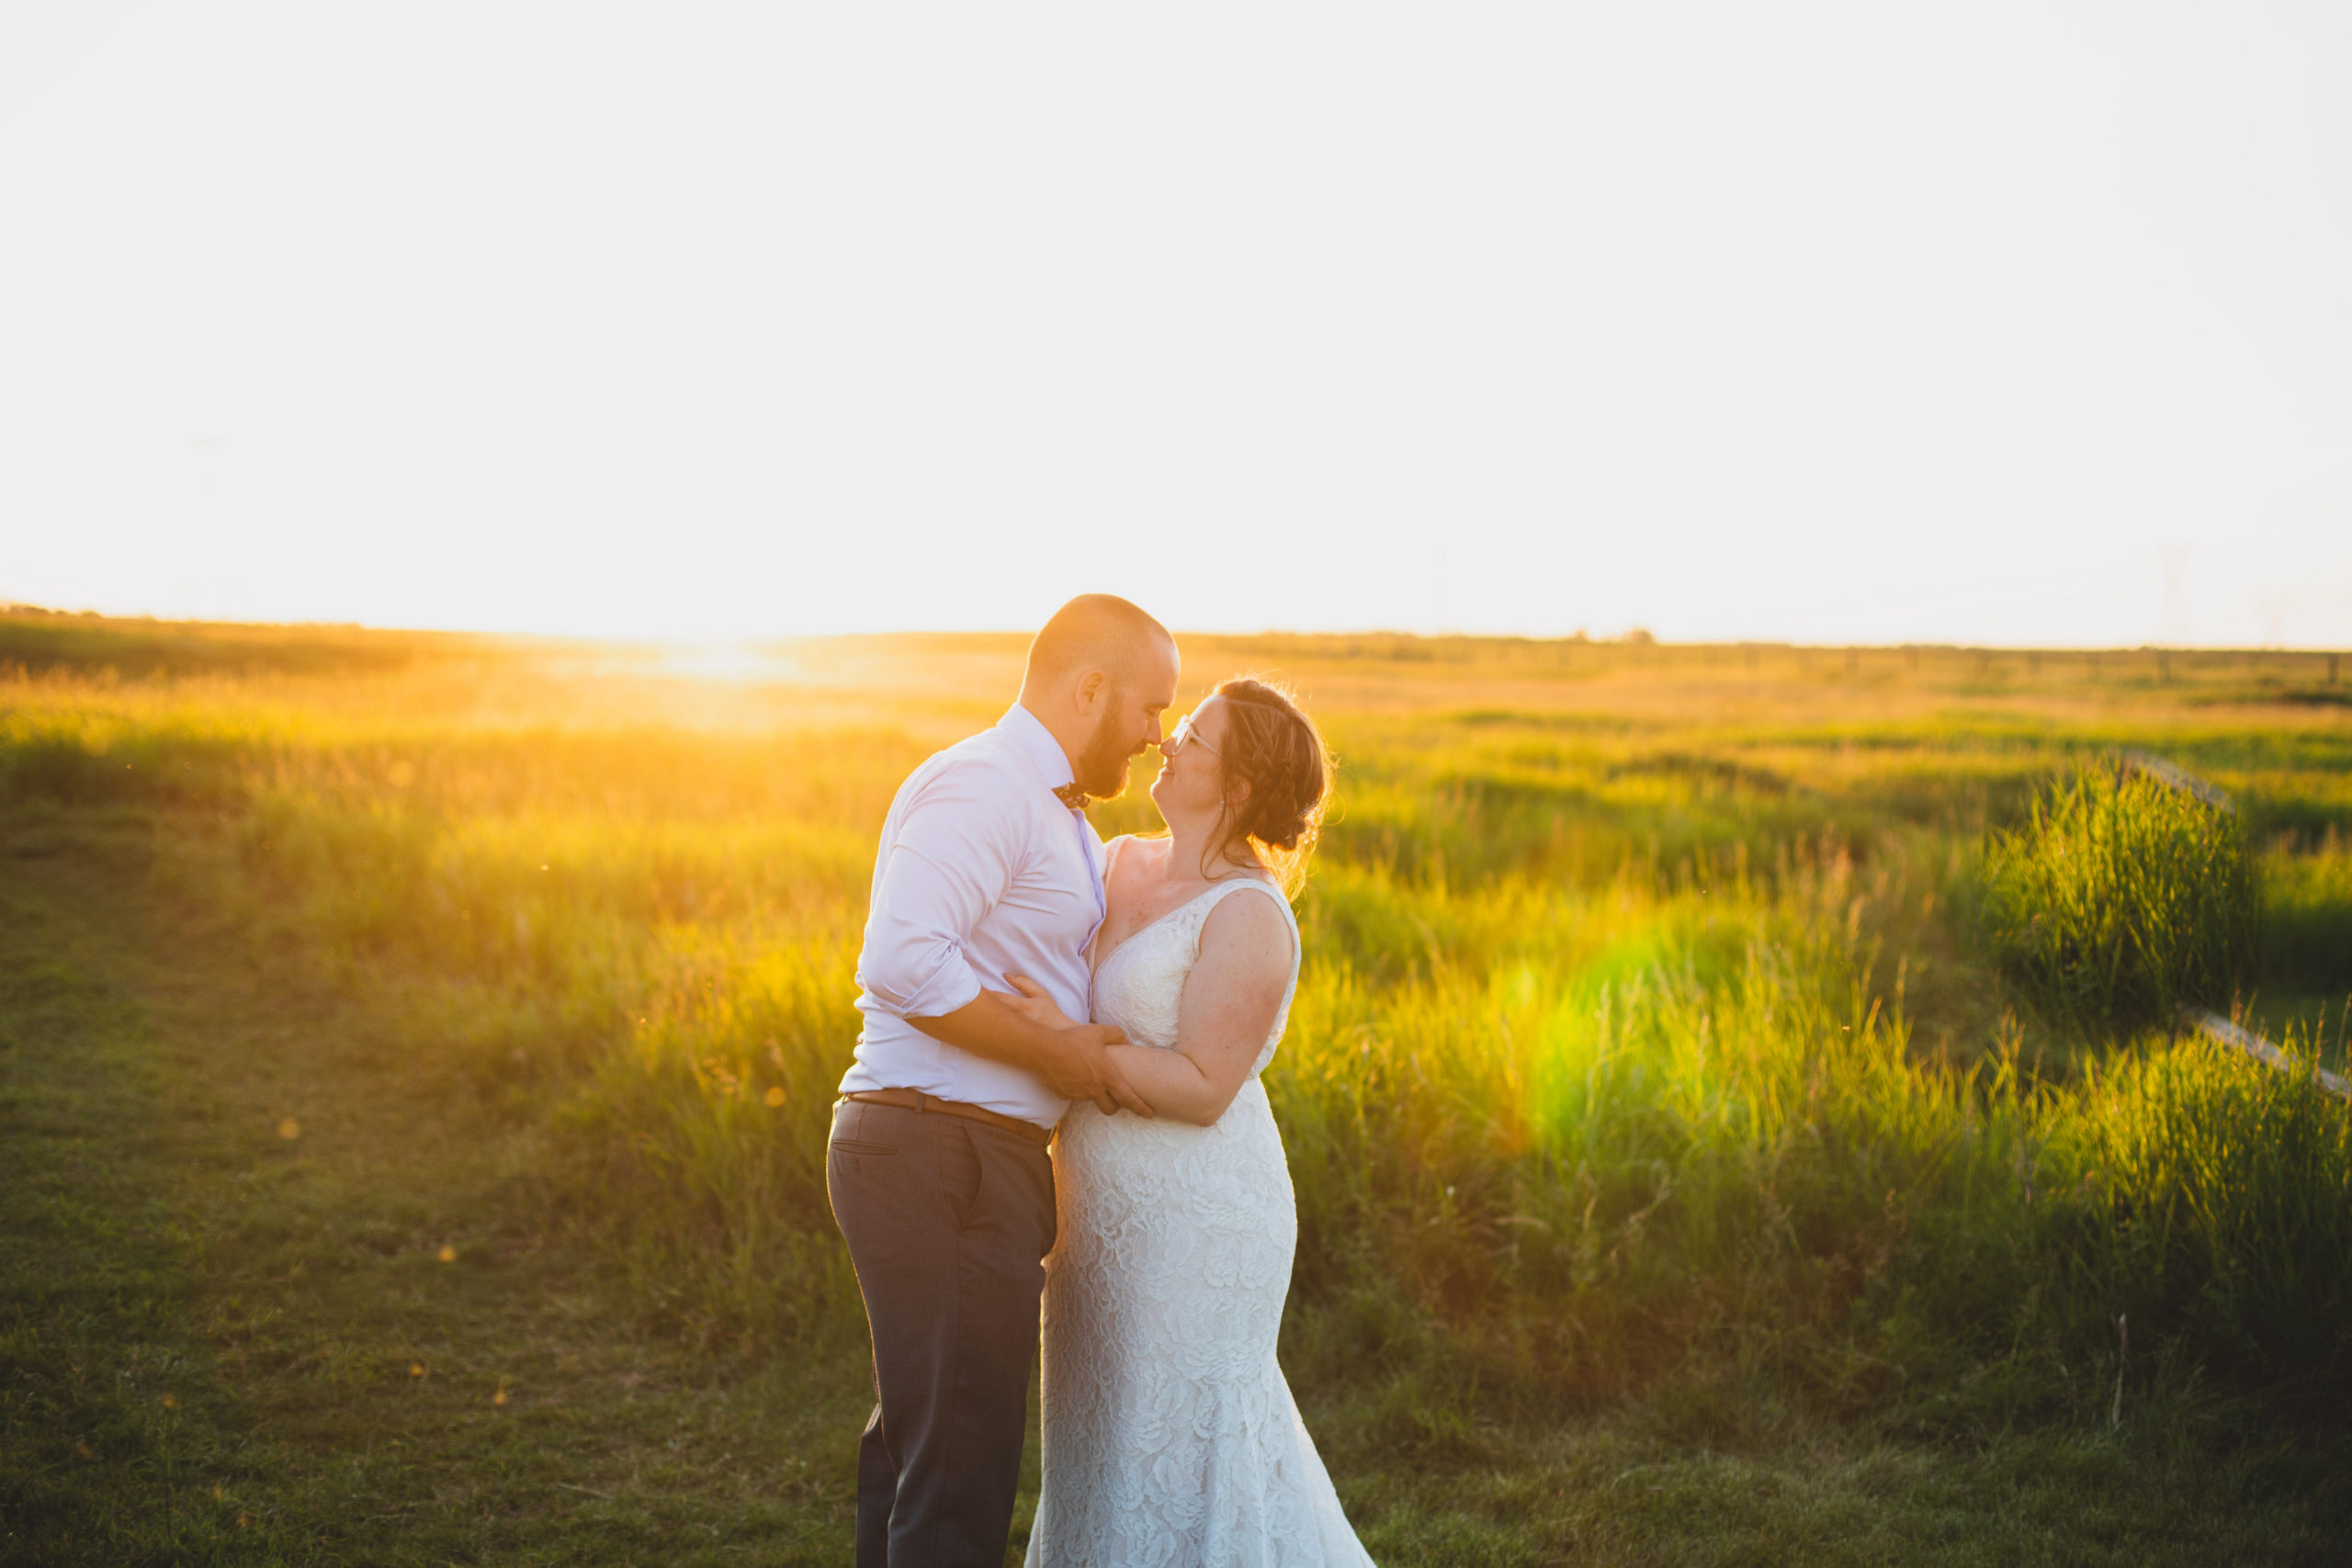 A bride and groom sharing a tender kiss in a field bathed in golden hues at sunset.